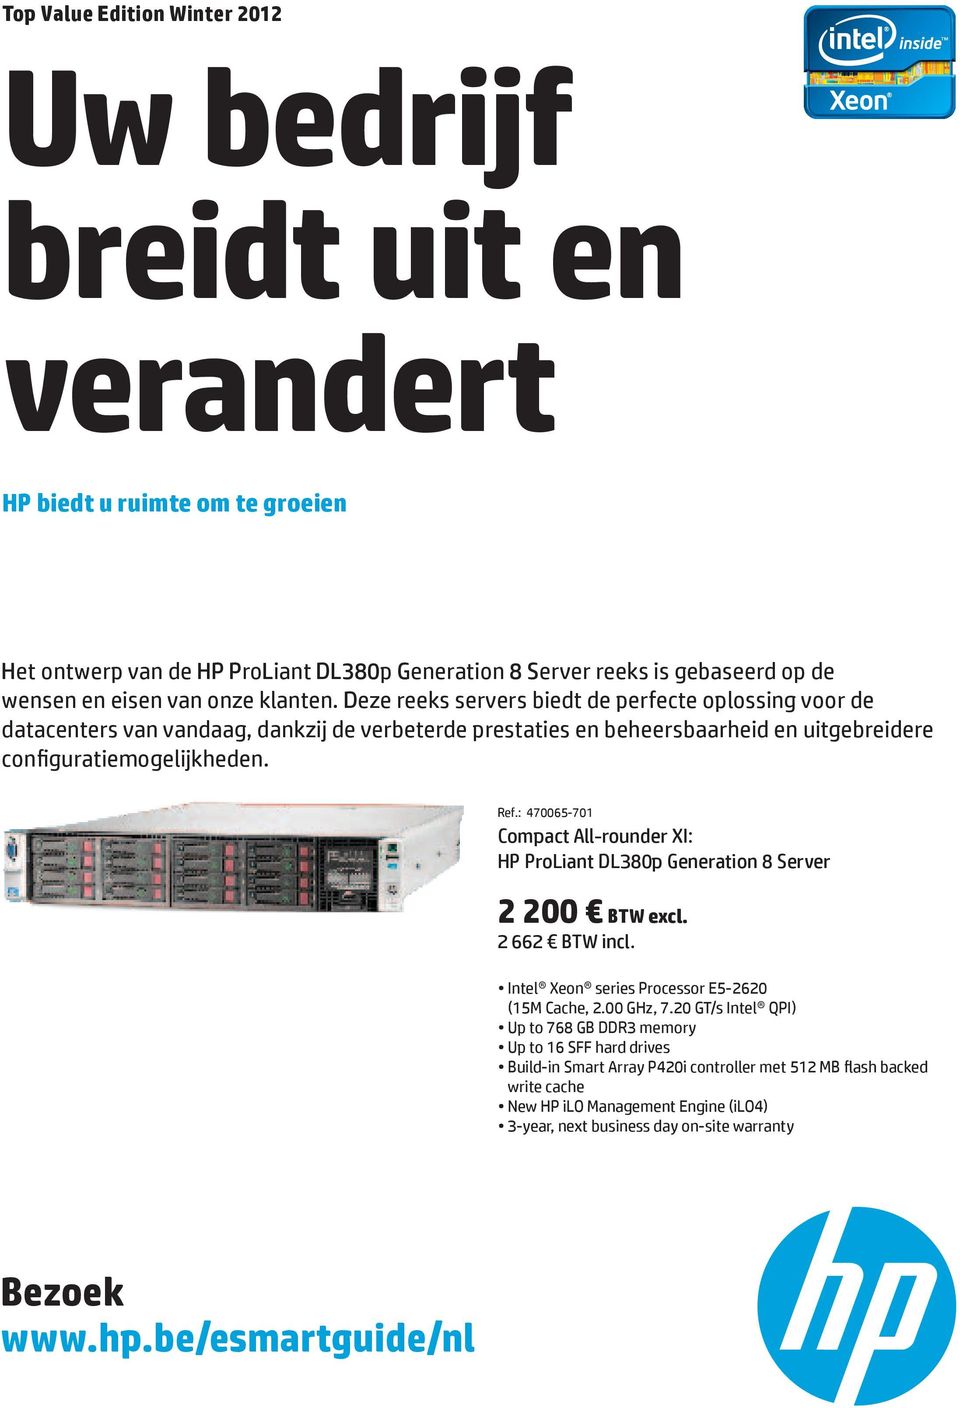 : 470065-701 Compact All-rounder XI: HP ProLiant DL380p Generation 8 Server 2 200 BTW excl. 2 662 BTW incl. Intel Xeon series Processor E5-2620 (15M Cache, 2.00 GHz, 7.